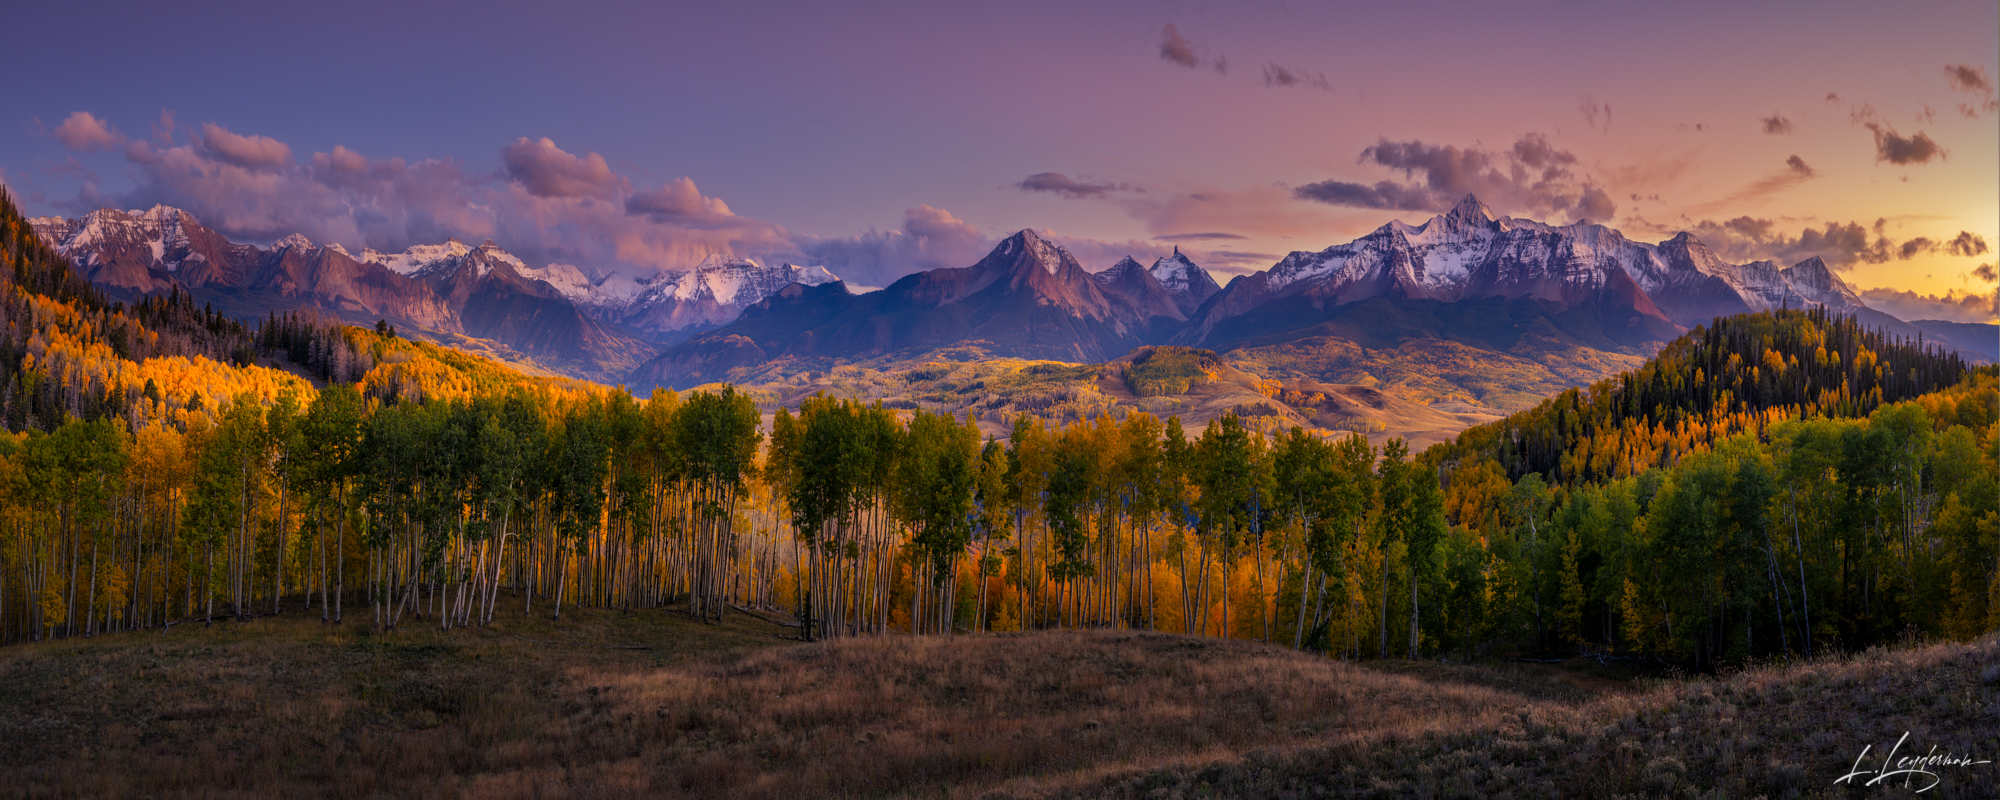 As the sun dips behind the rugged peaks, a wave of aspens – each like a lollipop with swirls of gold and amber – sweeps across...